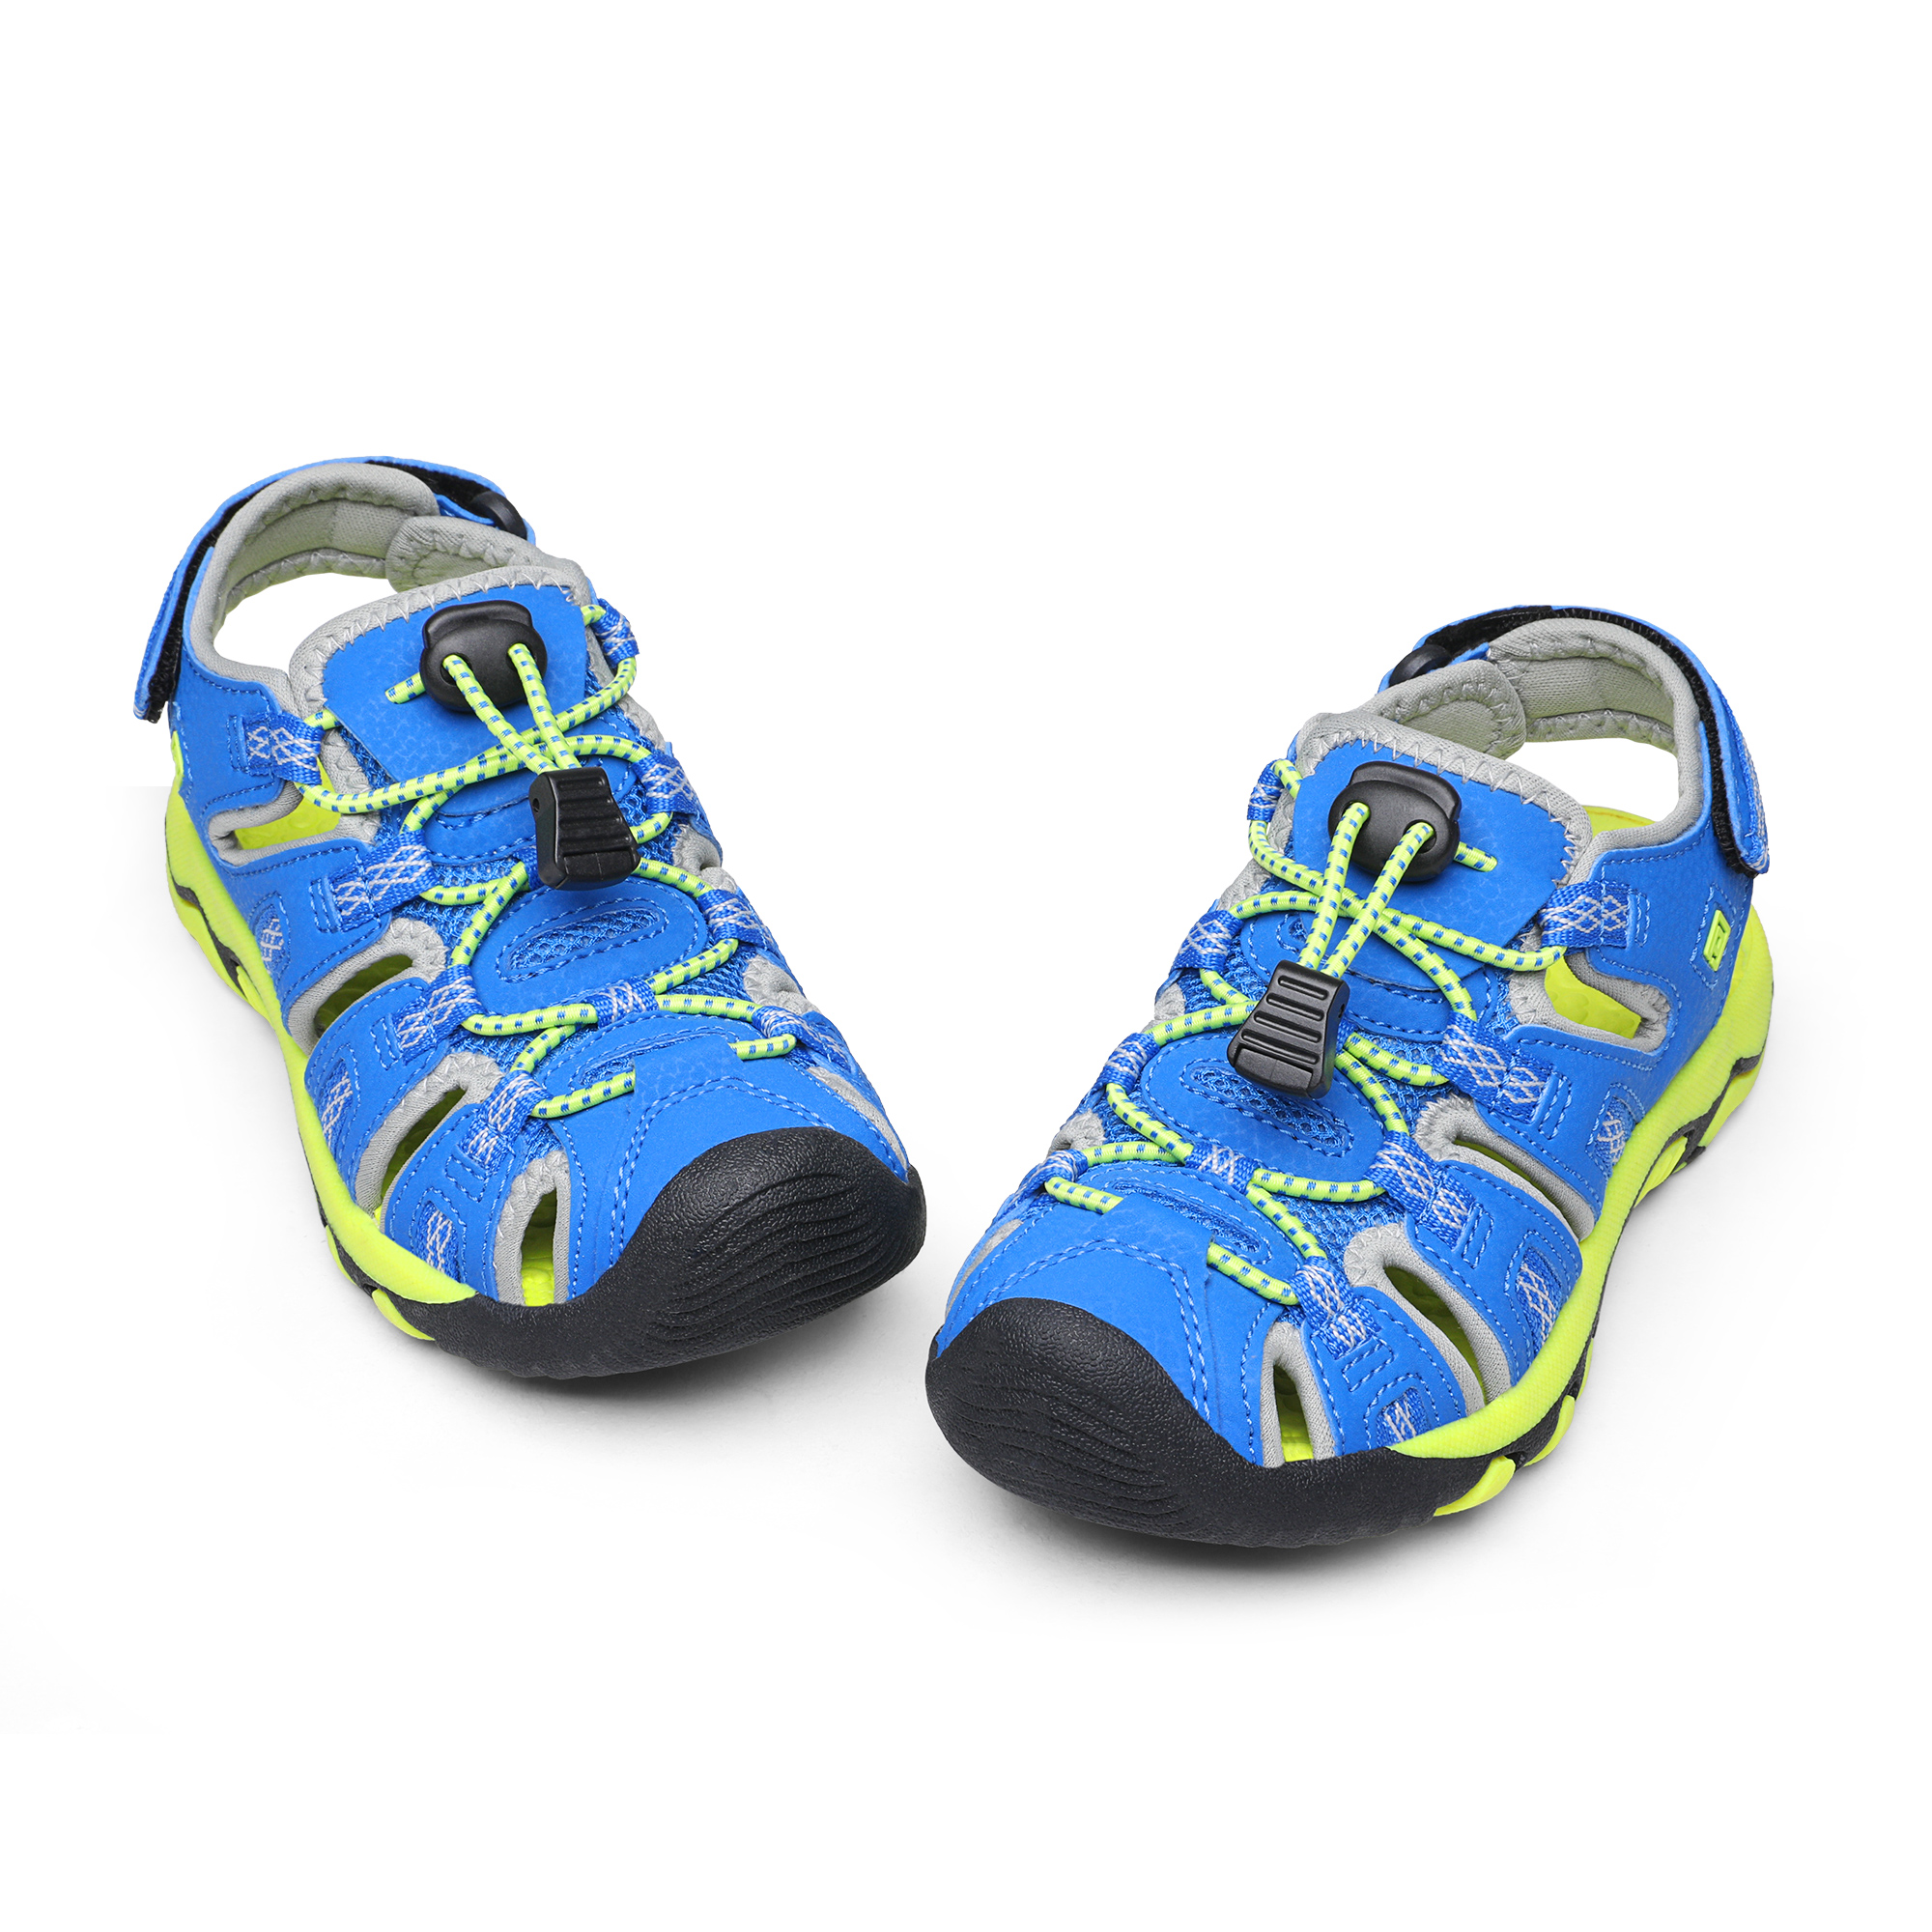 Dream Pairs Kids Summer Athletic Sandals Boys Girls School Outdoor Sports Sandals Walking Shoes 160912-K ROYAL/BLUE/GREY/NEON/GREEN Size 12 - image 5 of 5